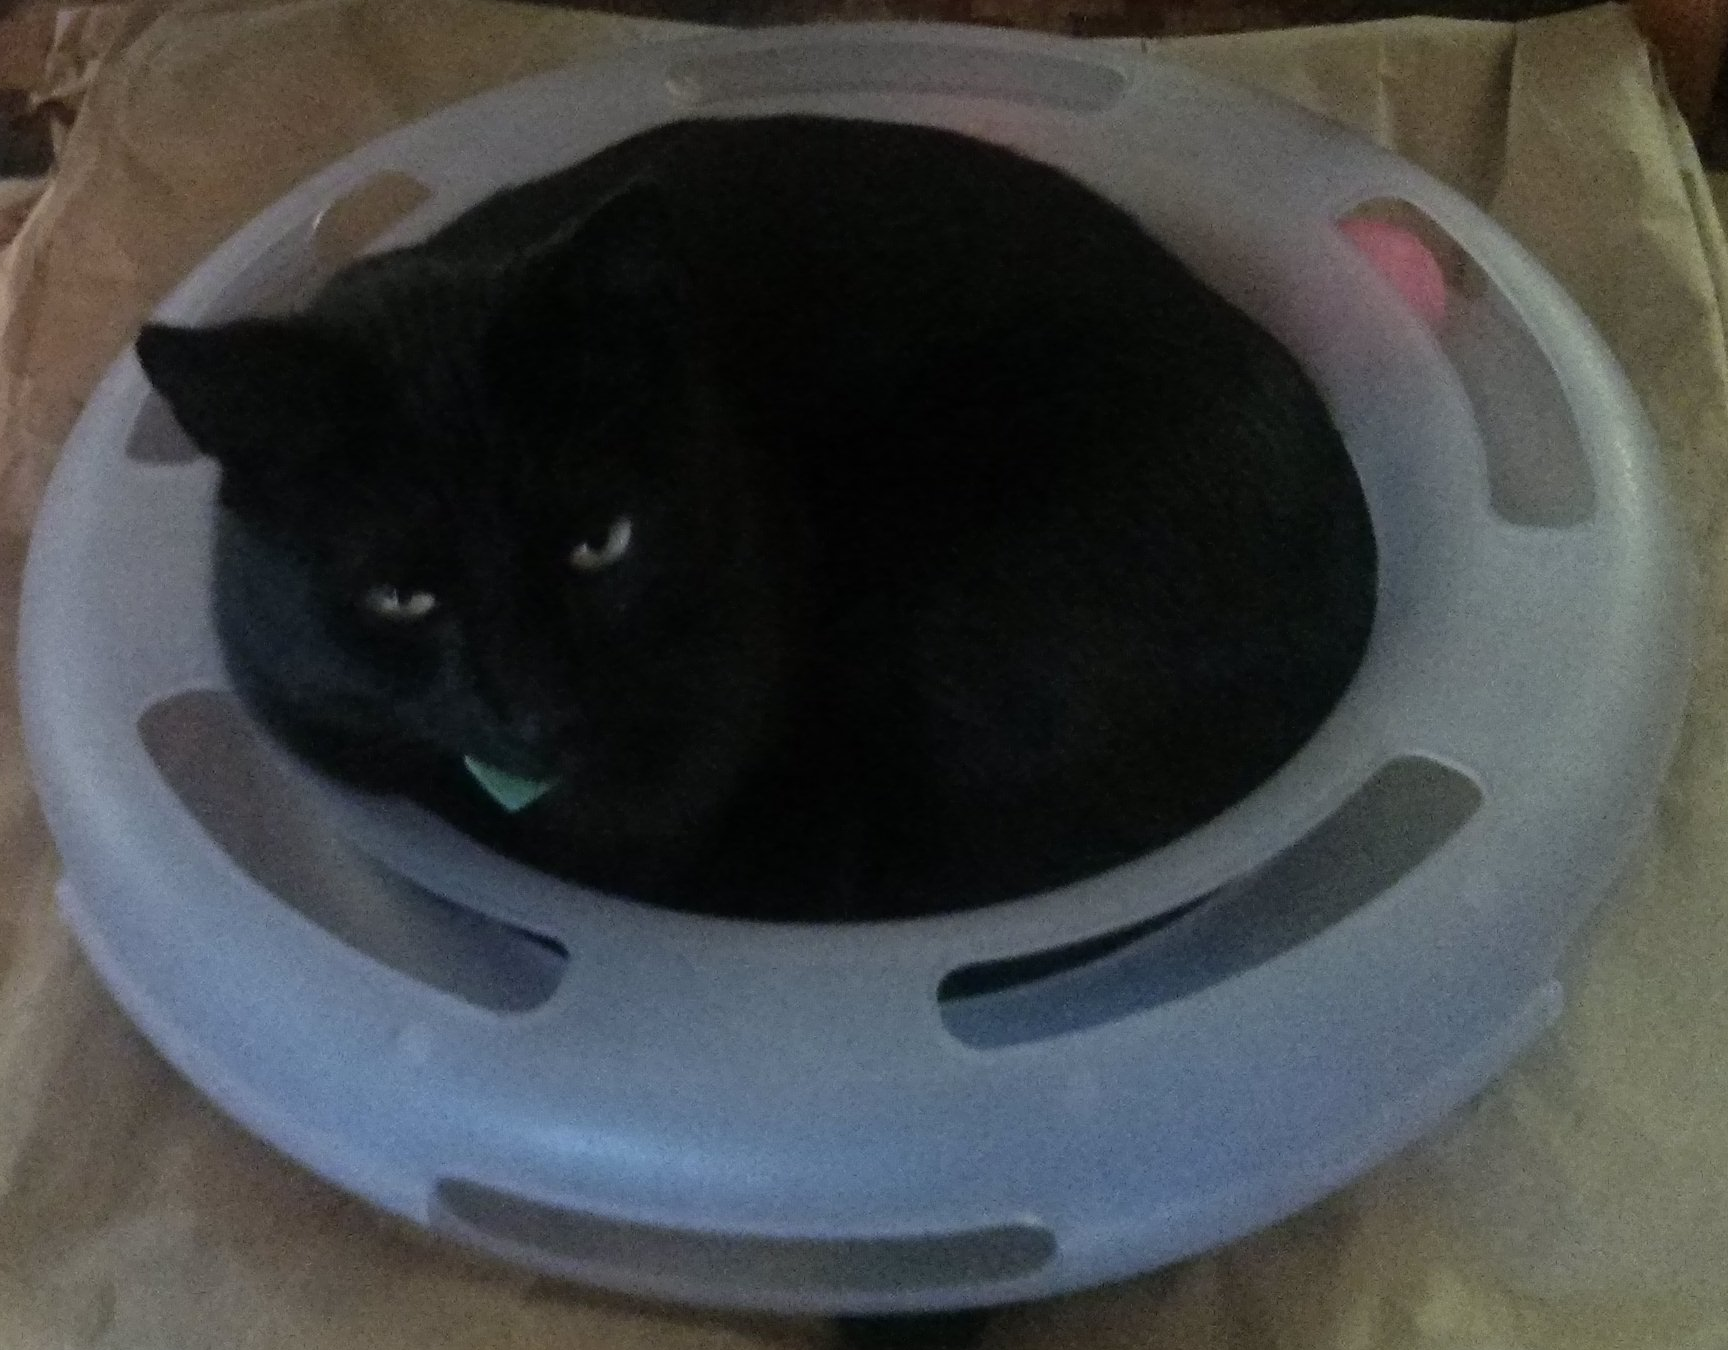 black cat curled into a ball in a plastic ring